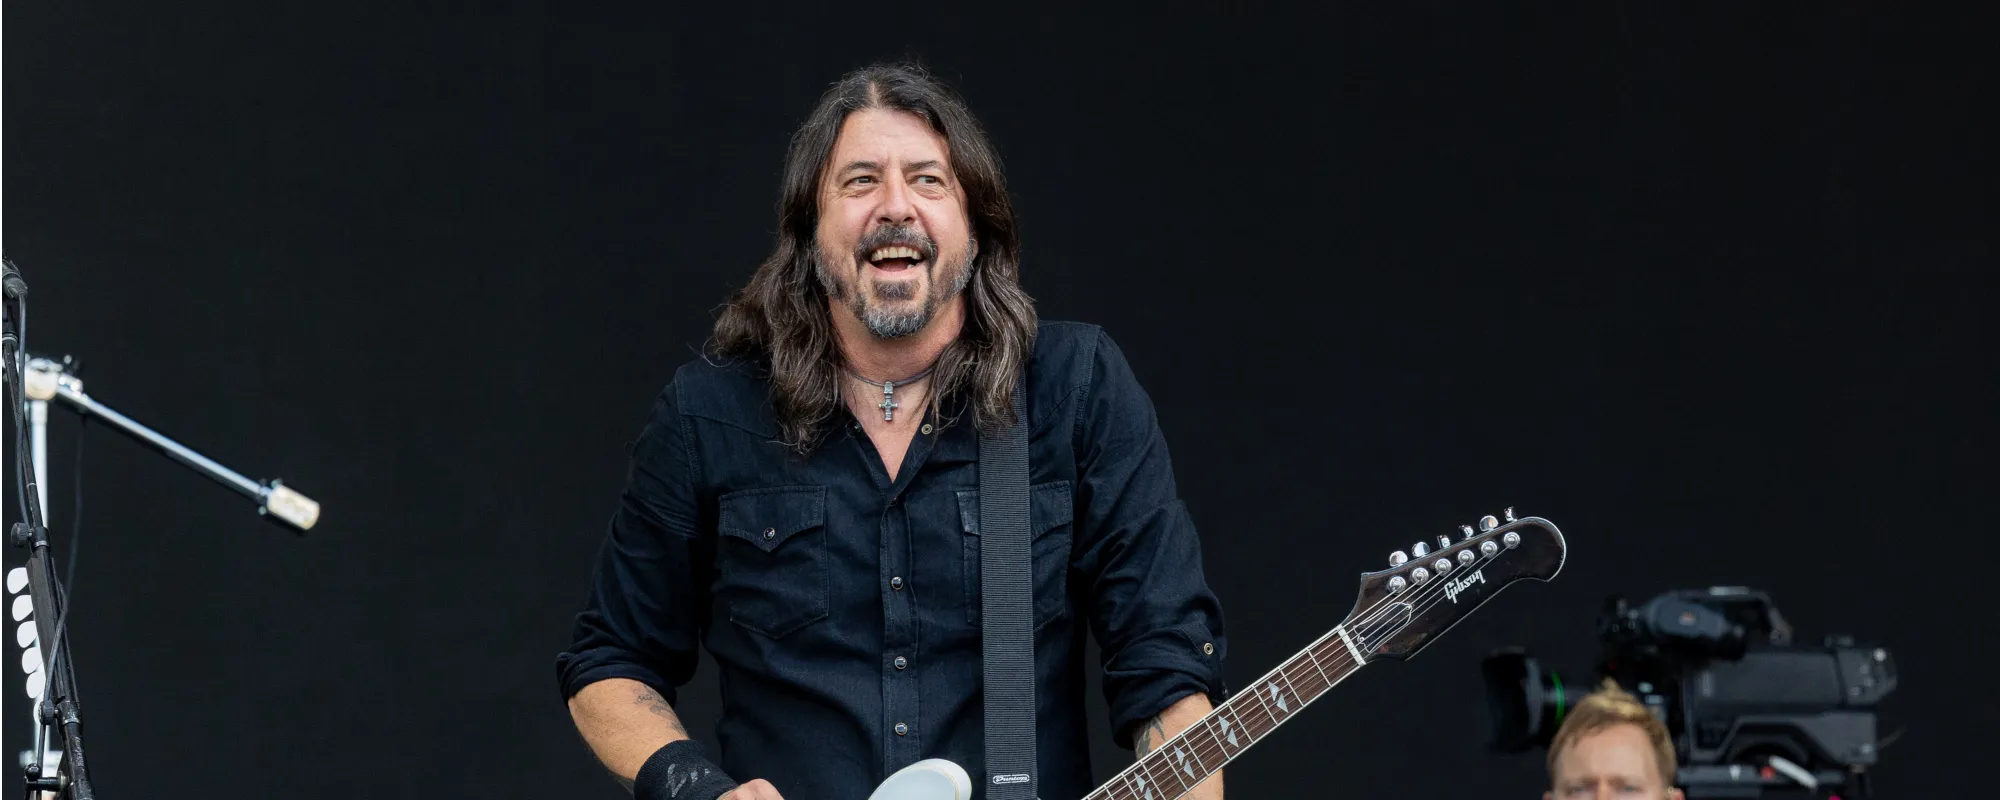 Foo Fighters Return with Career-Spanning Setlists, Tribute to Taylor Hawkins